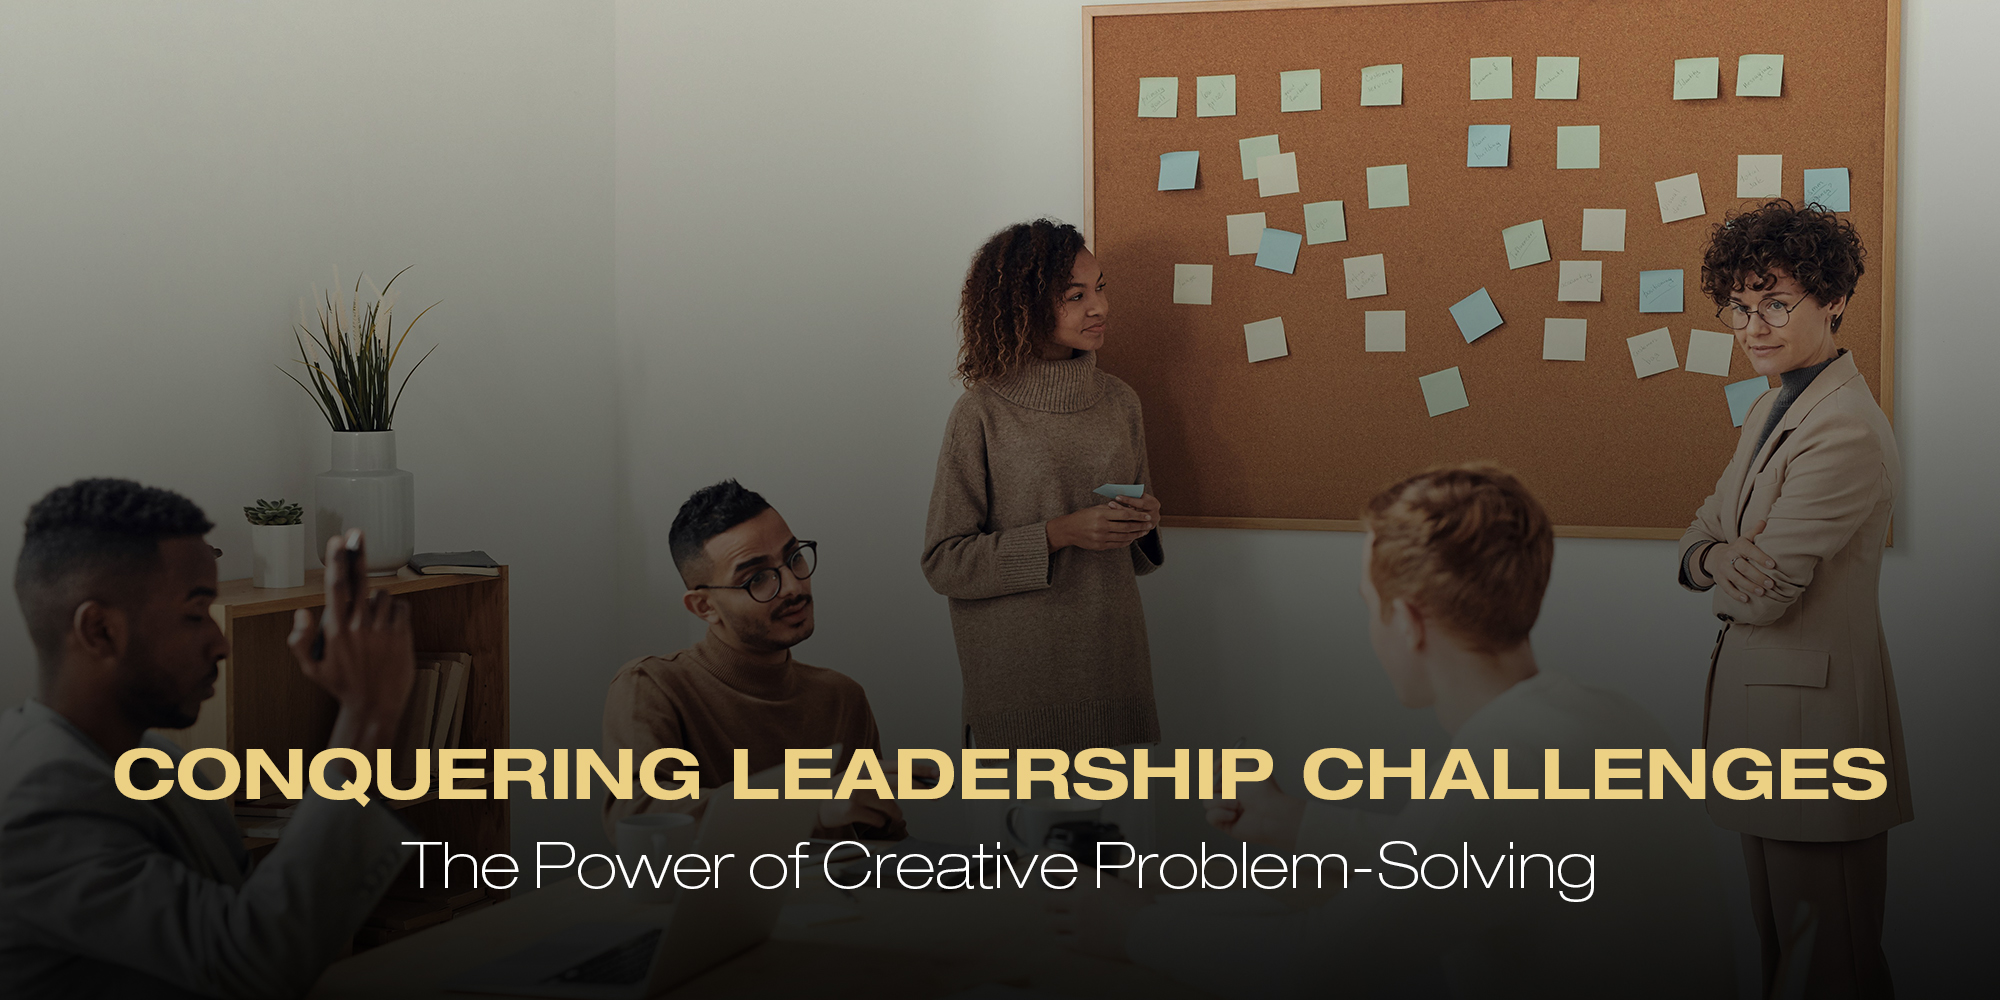 Conquering Leadership Challenges: The Power of Creative Problem-Solving